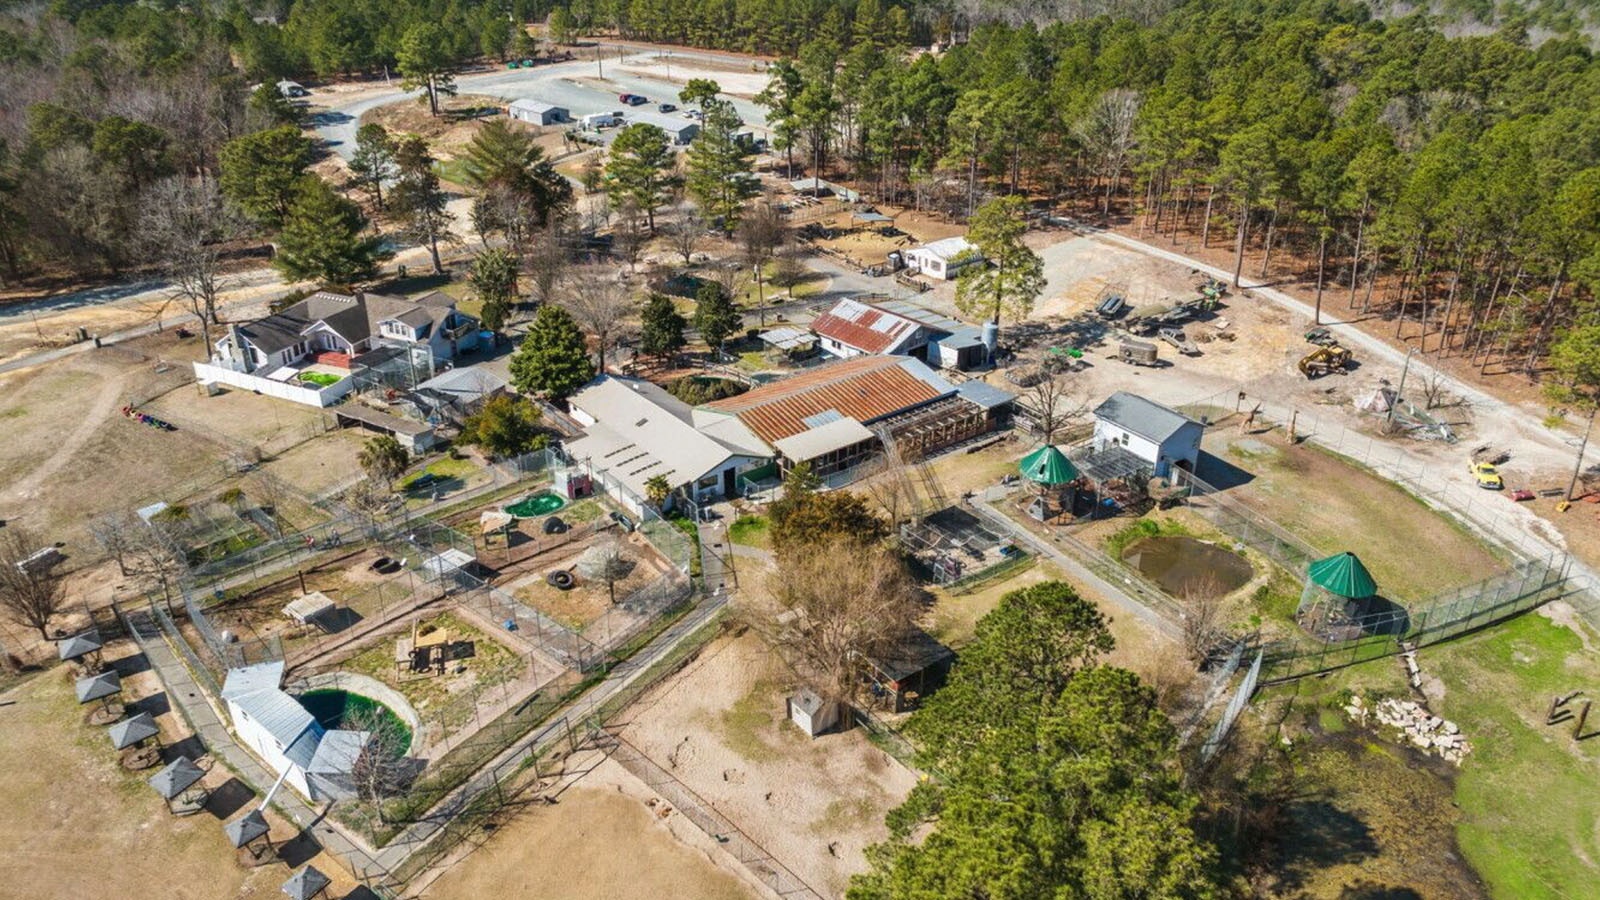 The 66-acre Aloha Safari Park in Harnett County, North Carolina, comes complete with everything a new zoo owner needs, including animals.